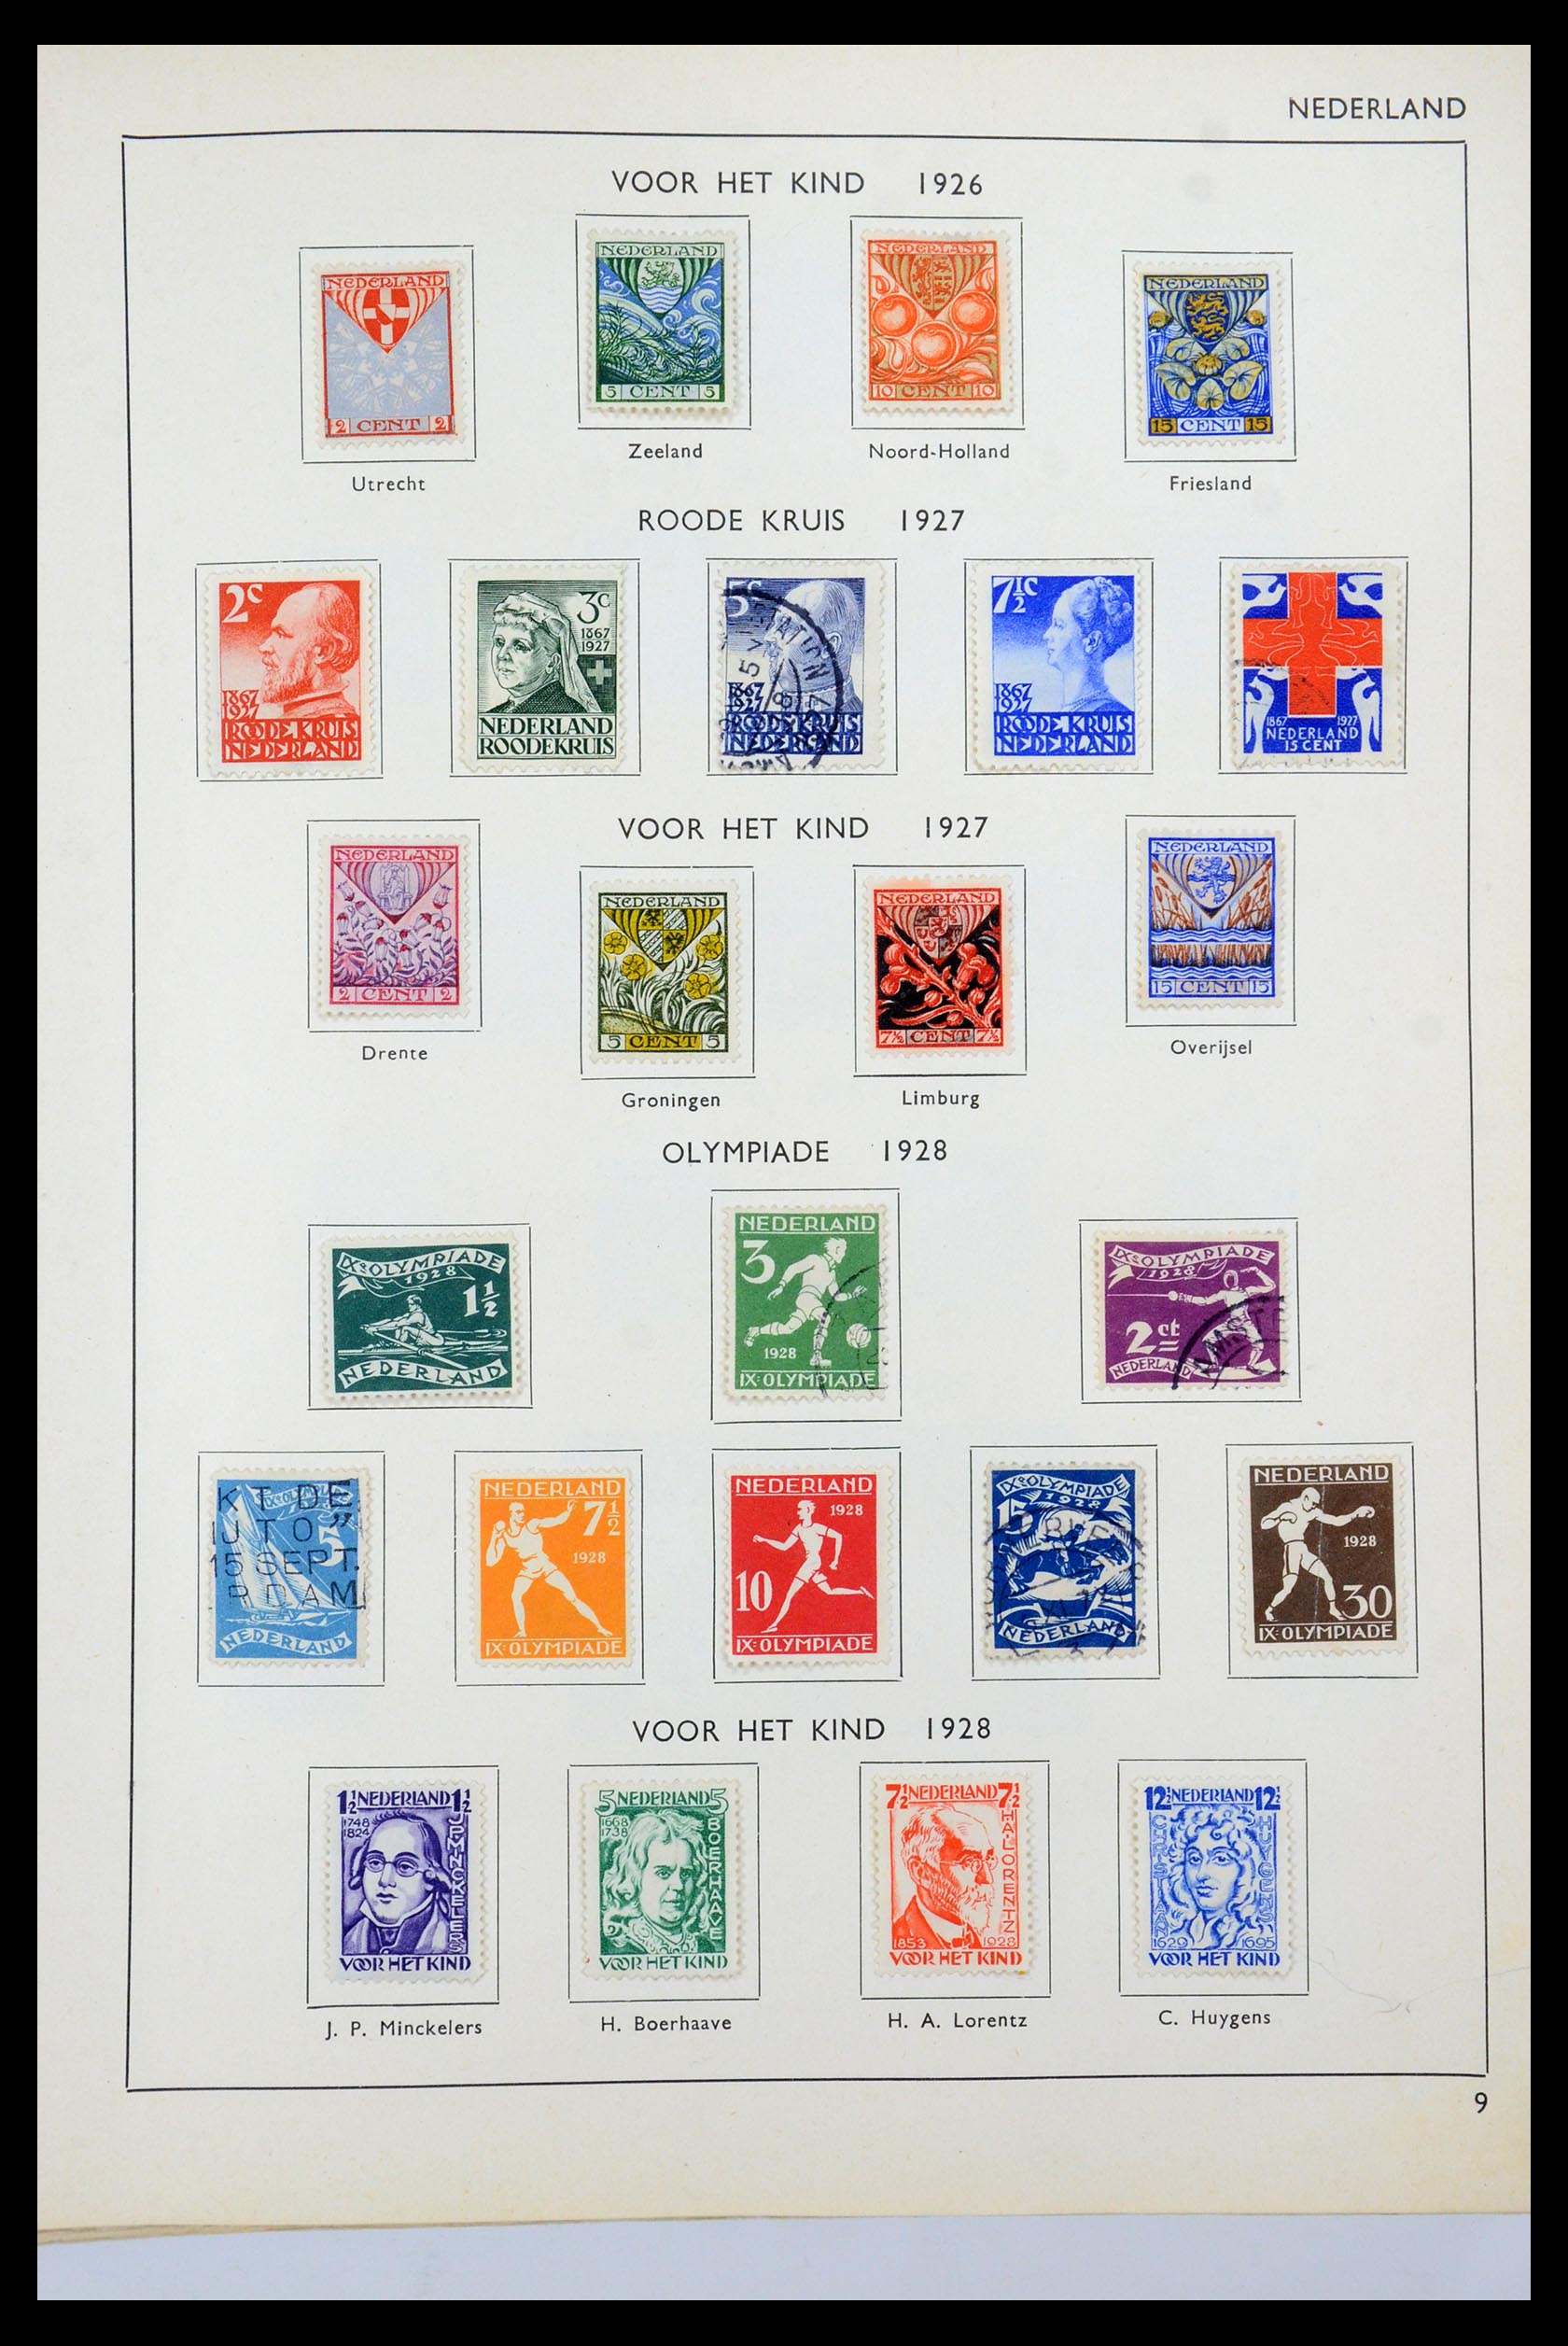 35535 011 - Stamp Collection 35535 Netherlands and Dutch territories 1852-1975.